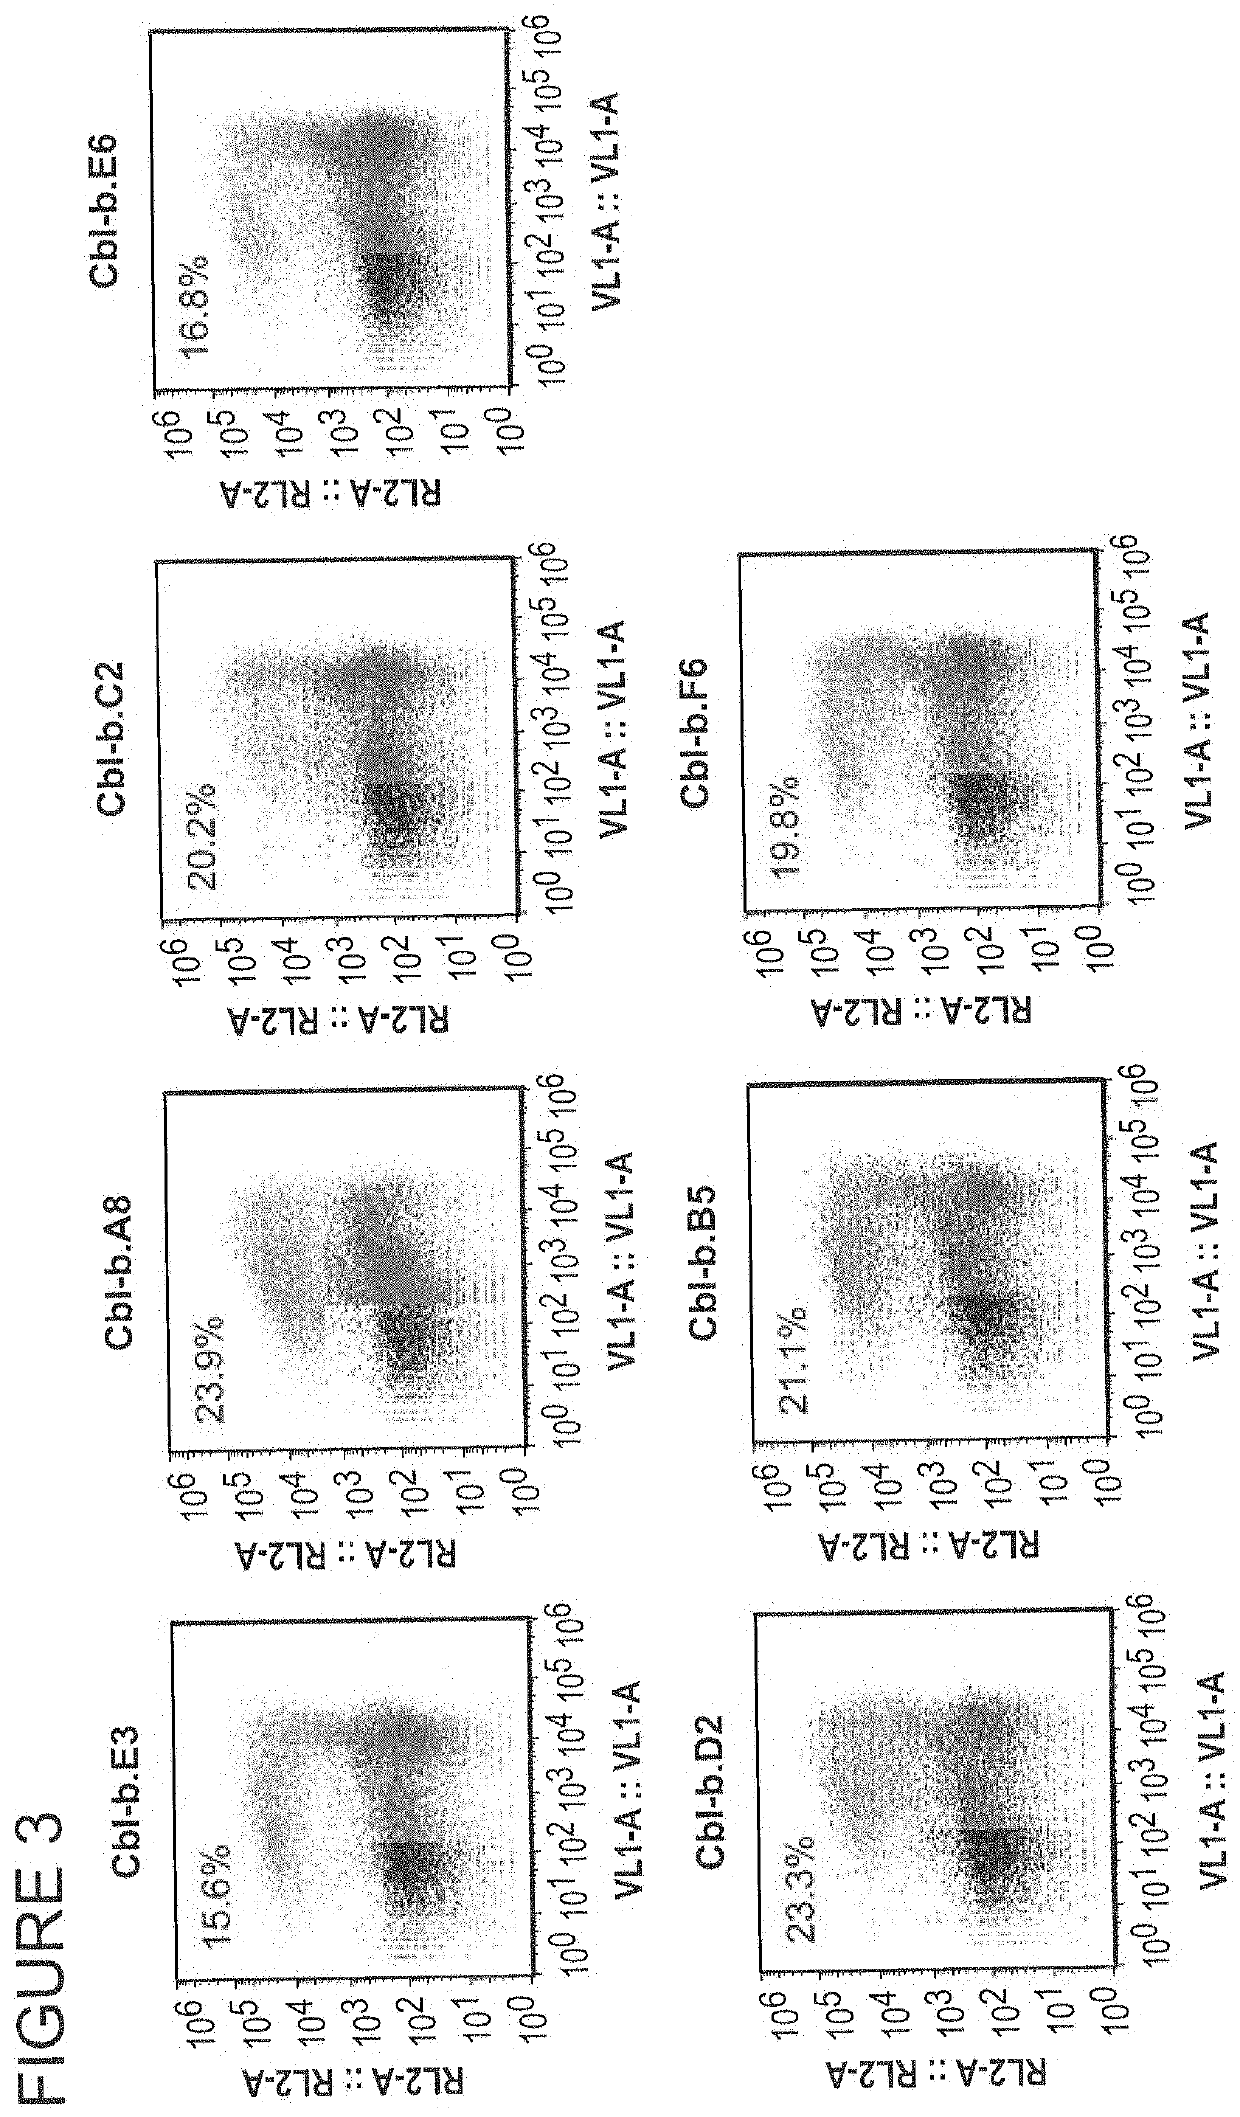 Cblb endonuclease variants, compositions, and methods of use